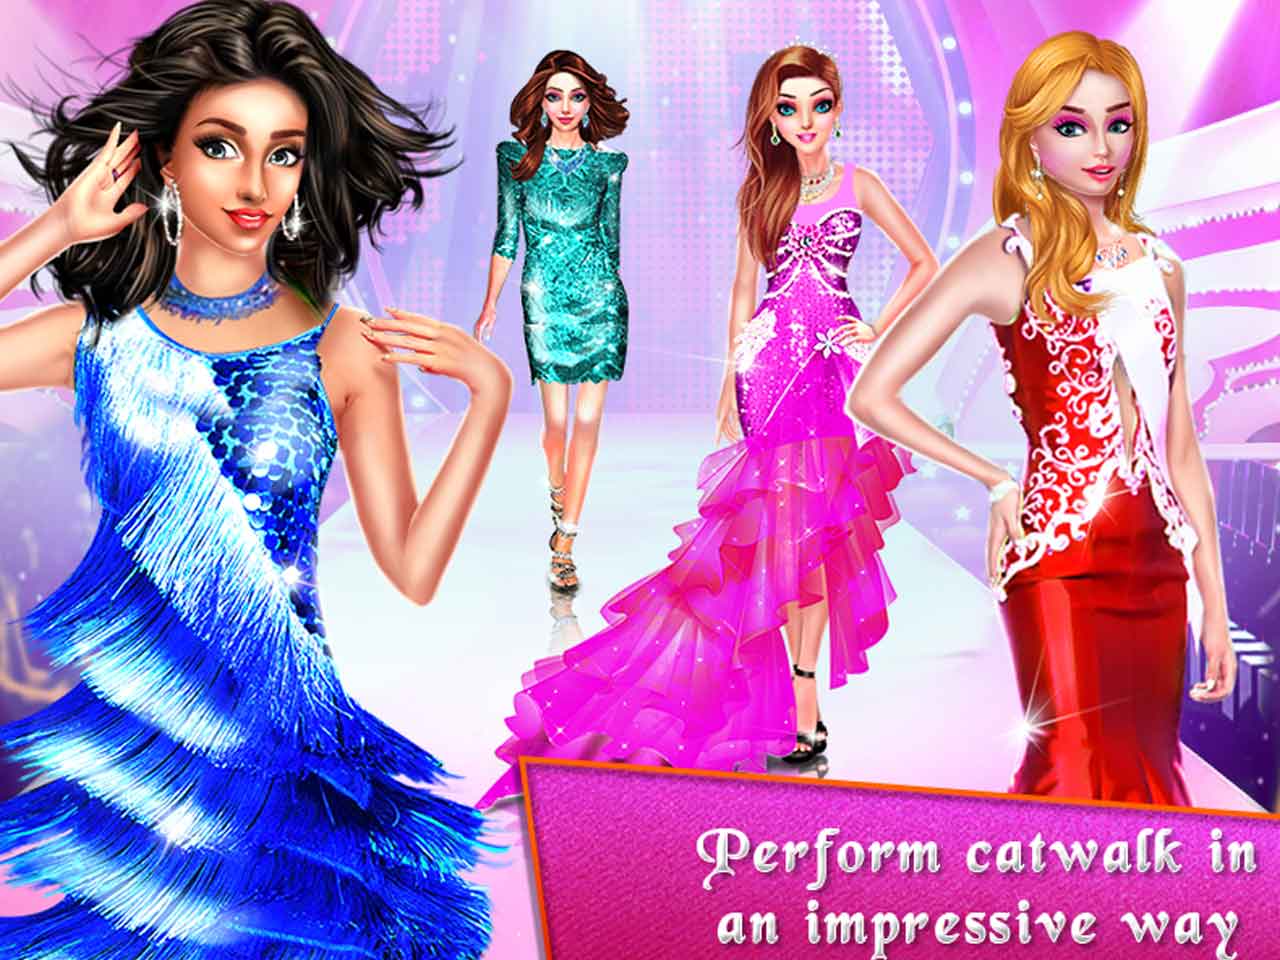 20 Game Fashion Show Terbaik di Android (Offline & Online)